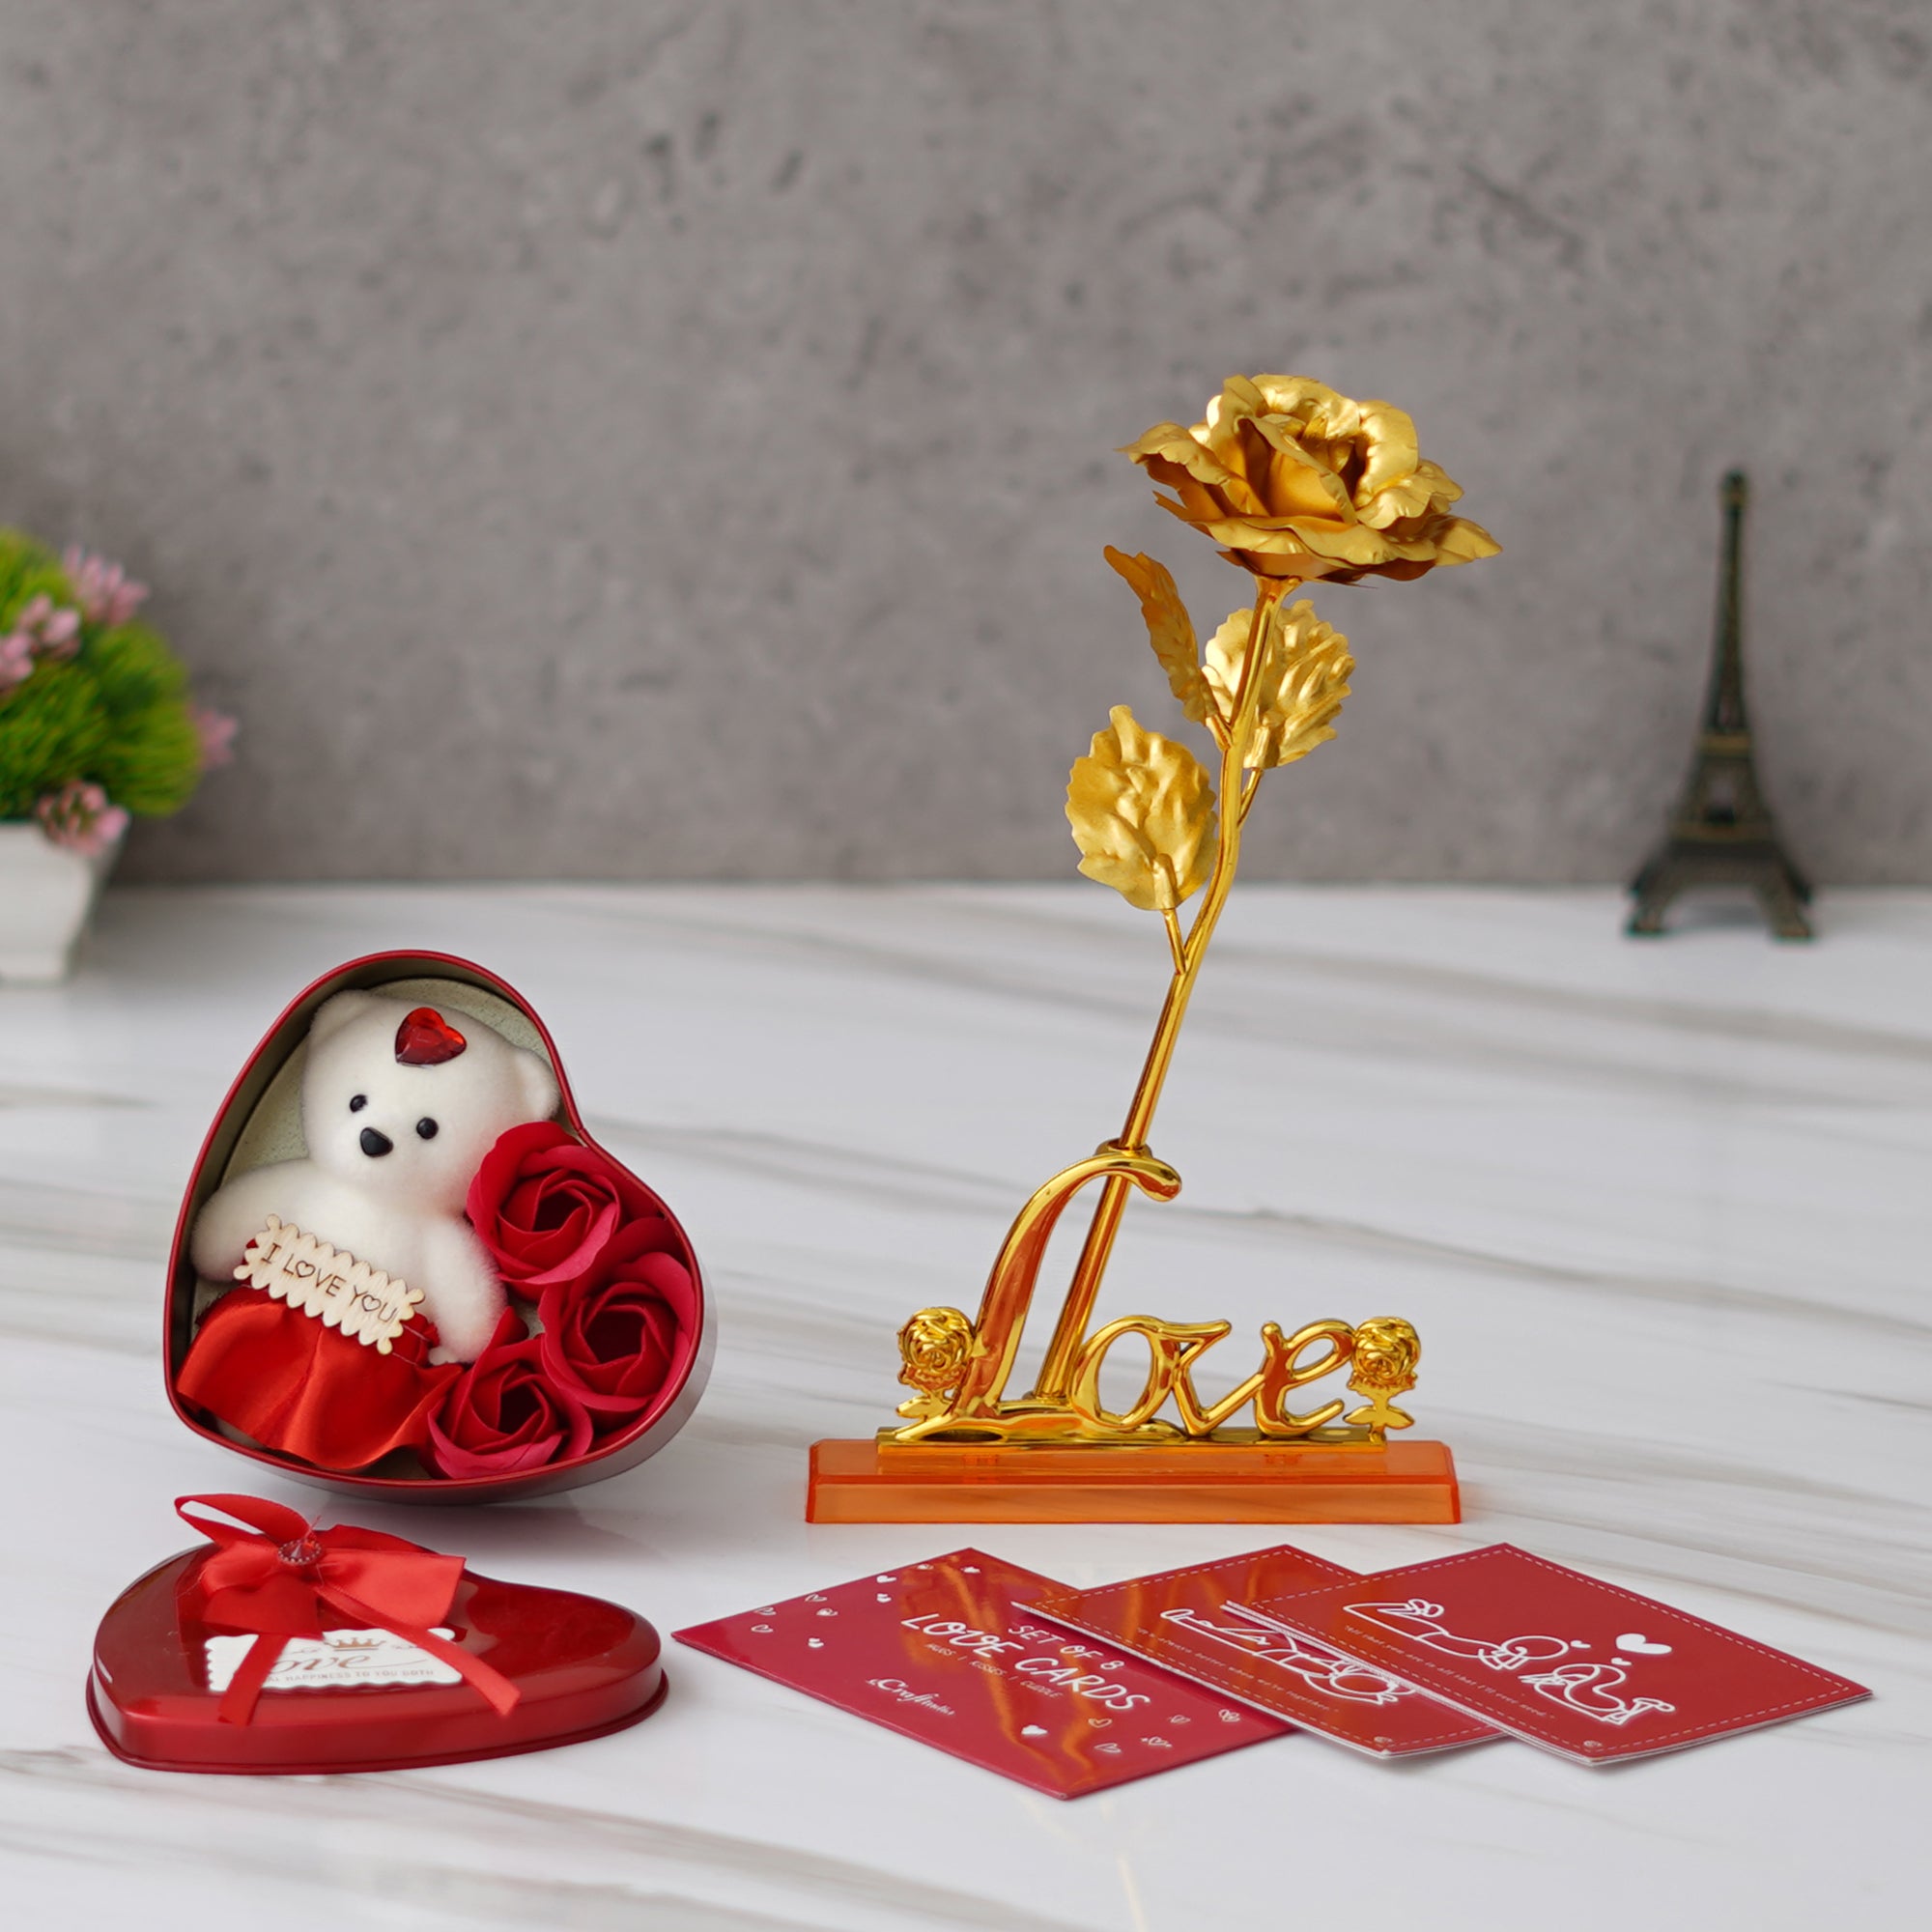 Valentine Combo of Pack of 8 Love Gift Cards, Love Golden Rose Table Decor Gift Set Showpiece, Heart Shaped Gift Box Set with White Teddy and Red Roses